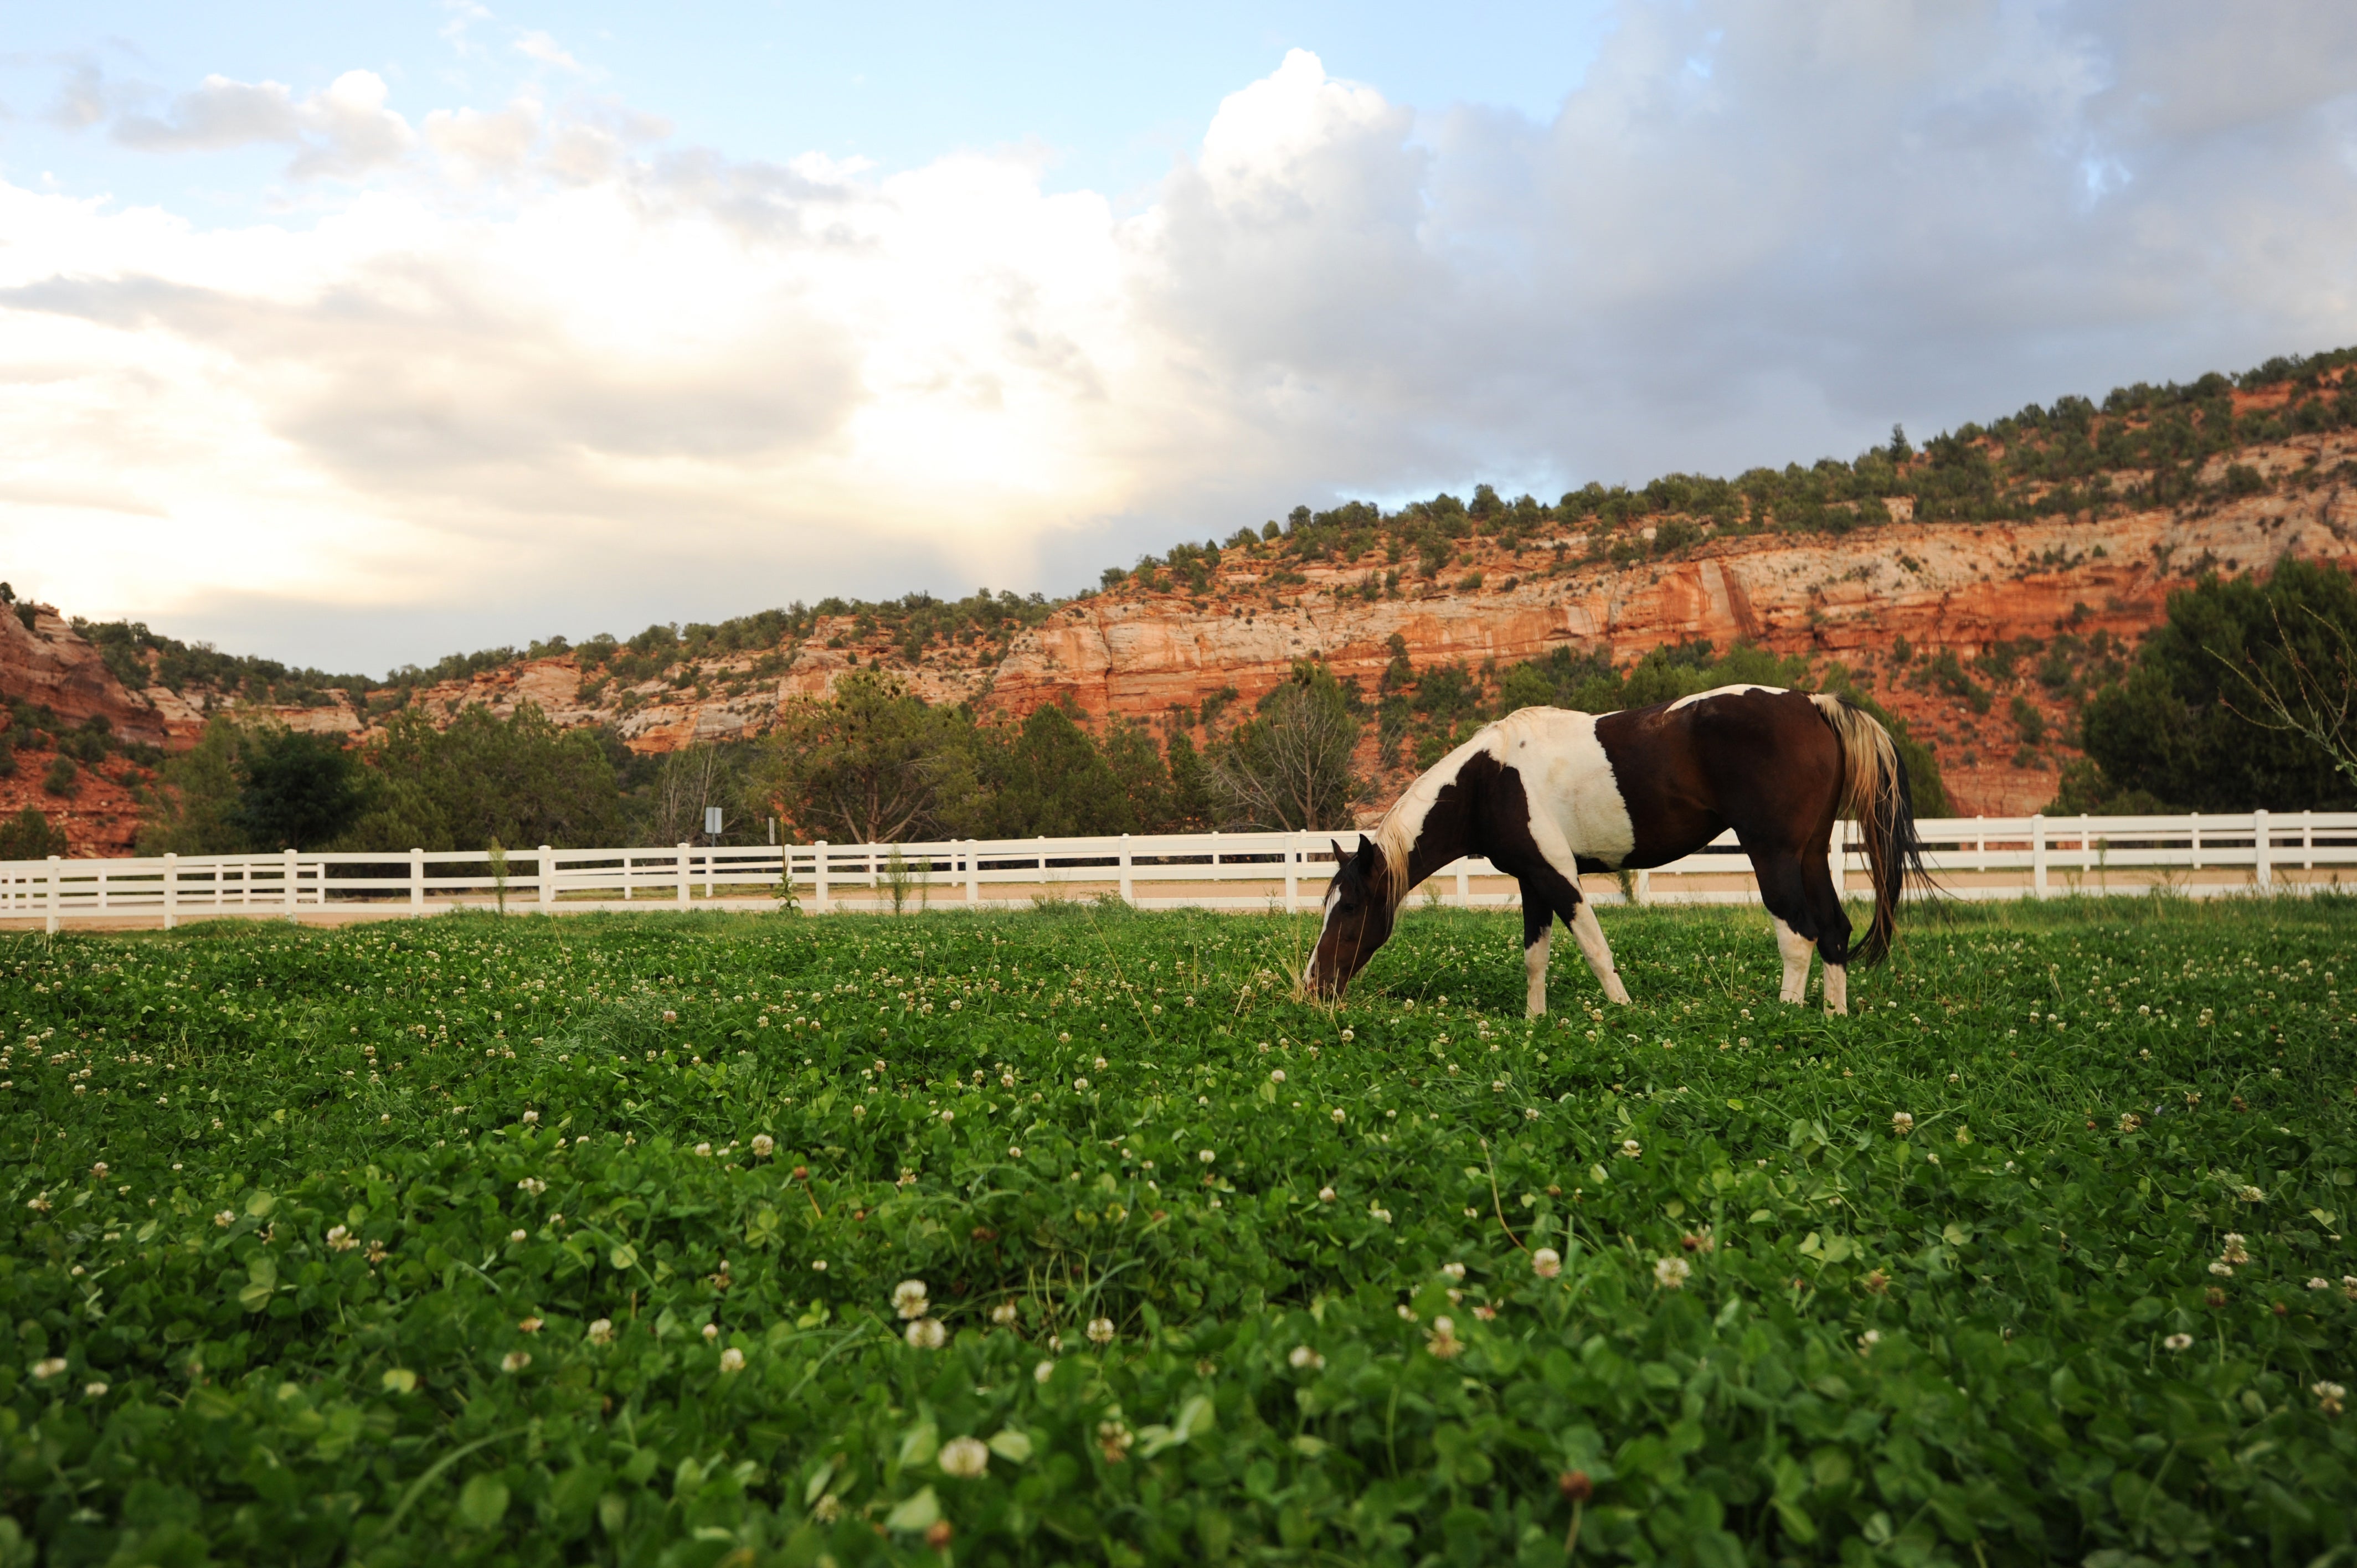 Jewel the horse eating green grass in a pasture